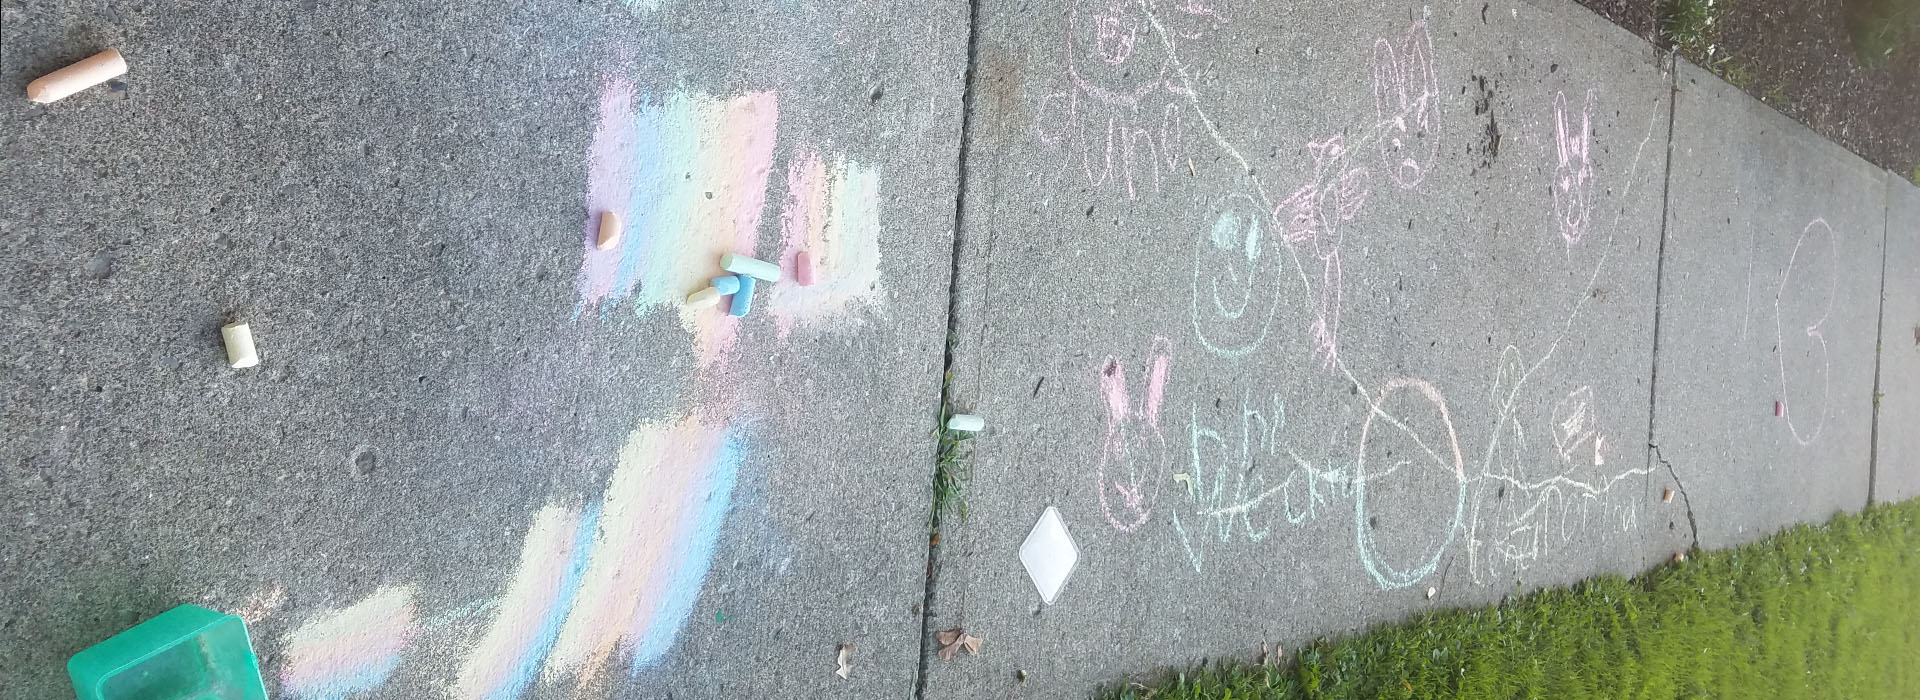 Sidewalk drawings at a missions event